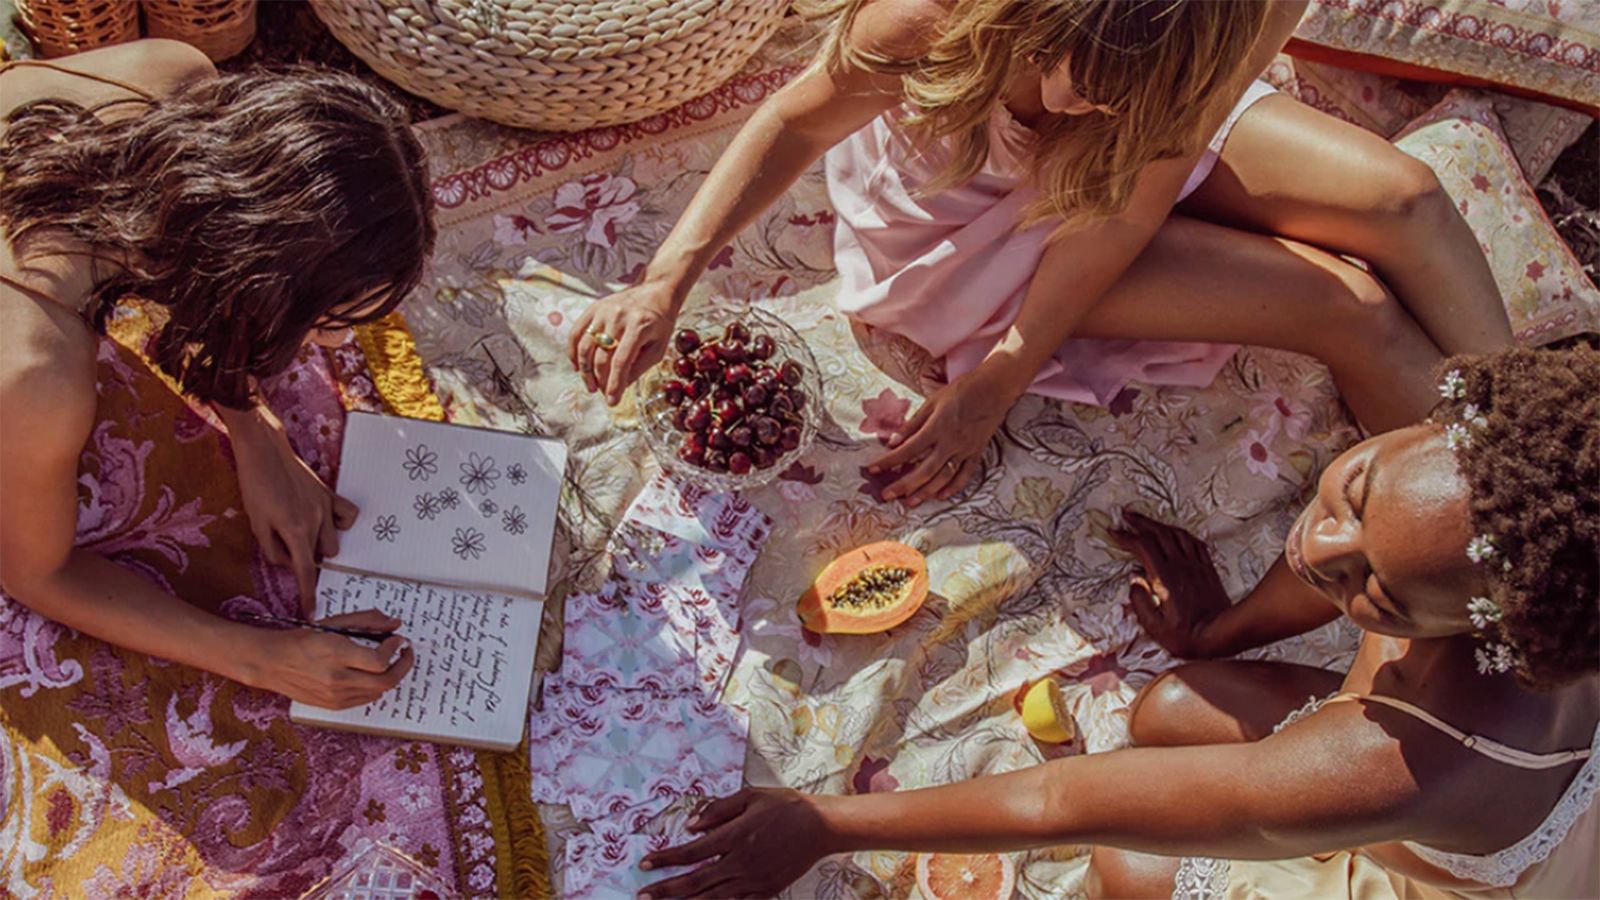 Everything you need to plan a perfect picnic, according to experts | CNN Underscored